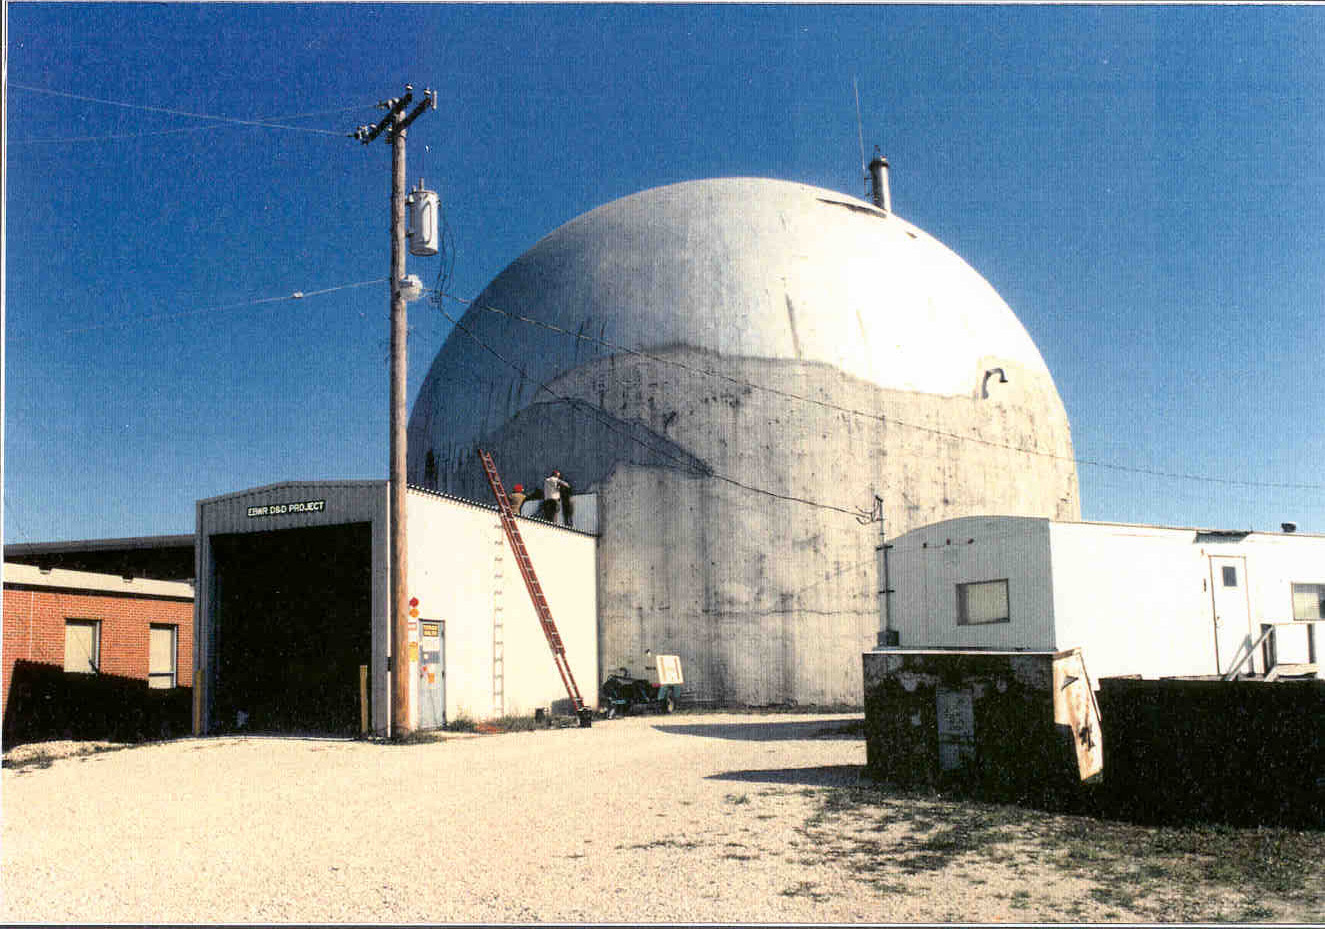 The decommissioning of the EBWR (Experimental Boiling Water Reactor) began in 1986 and was completed in February 1996.